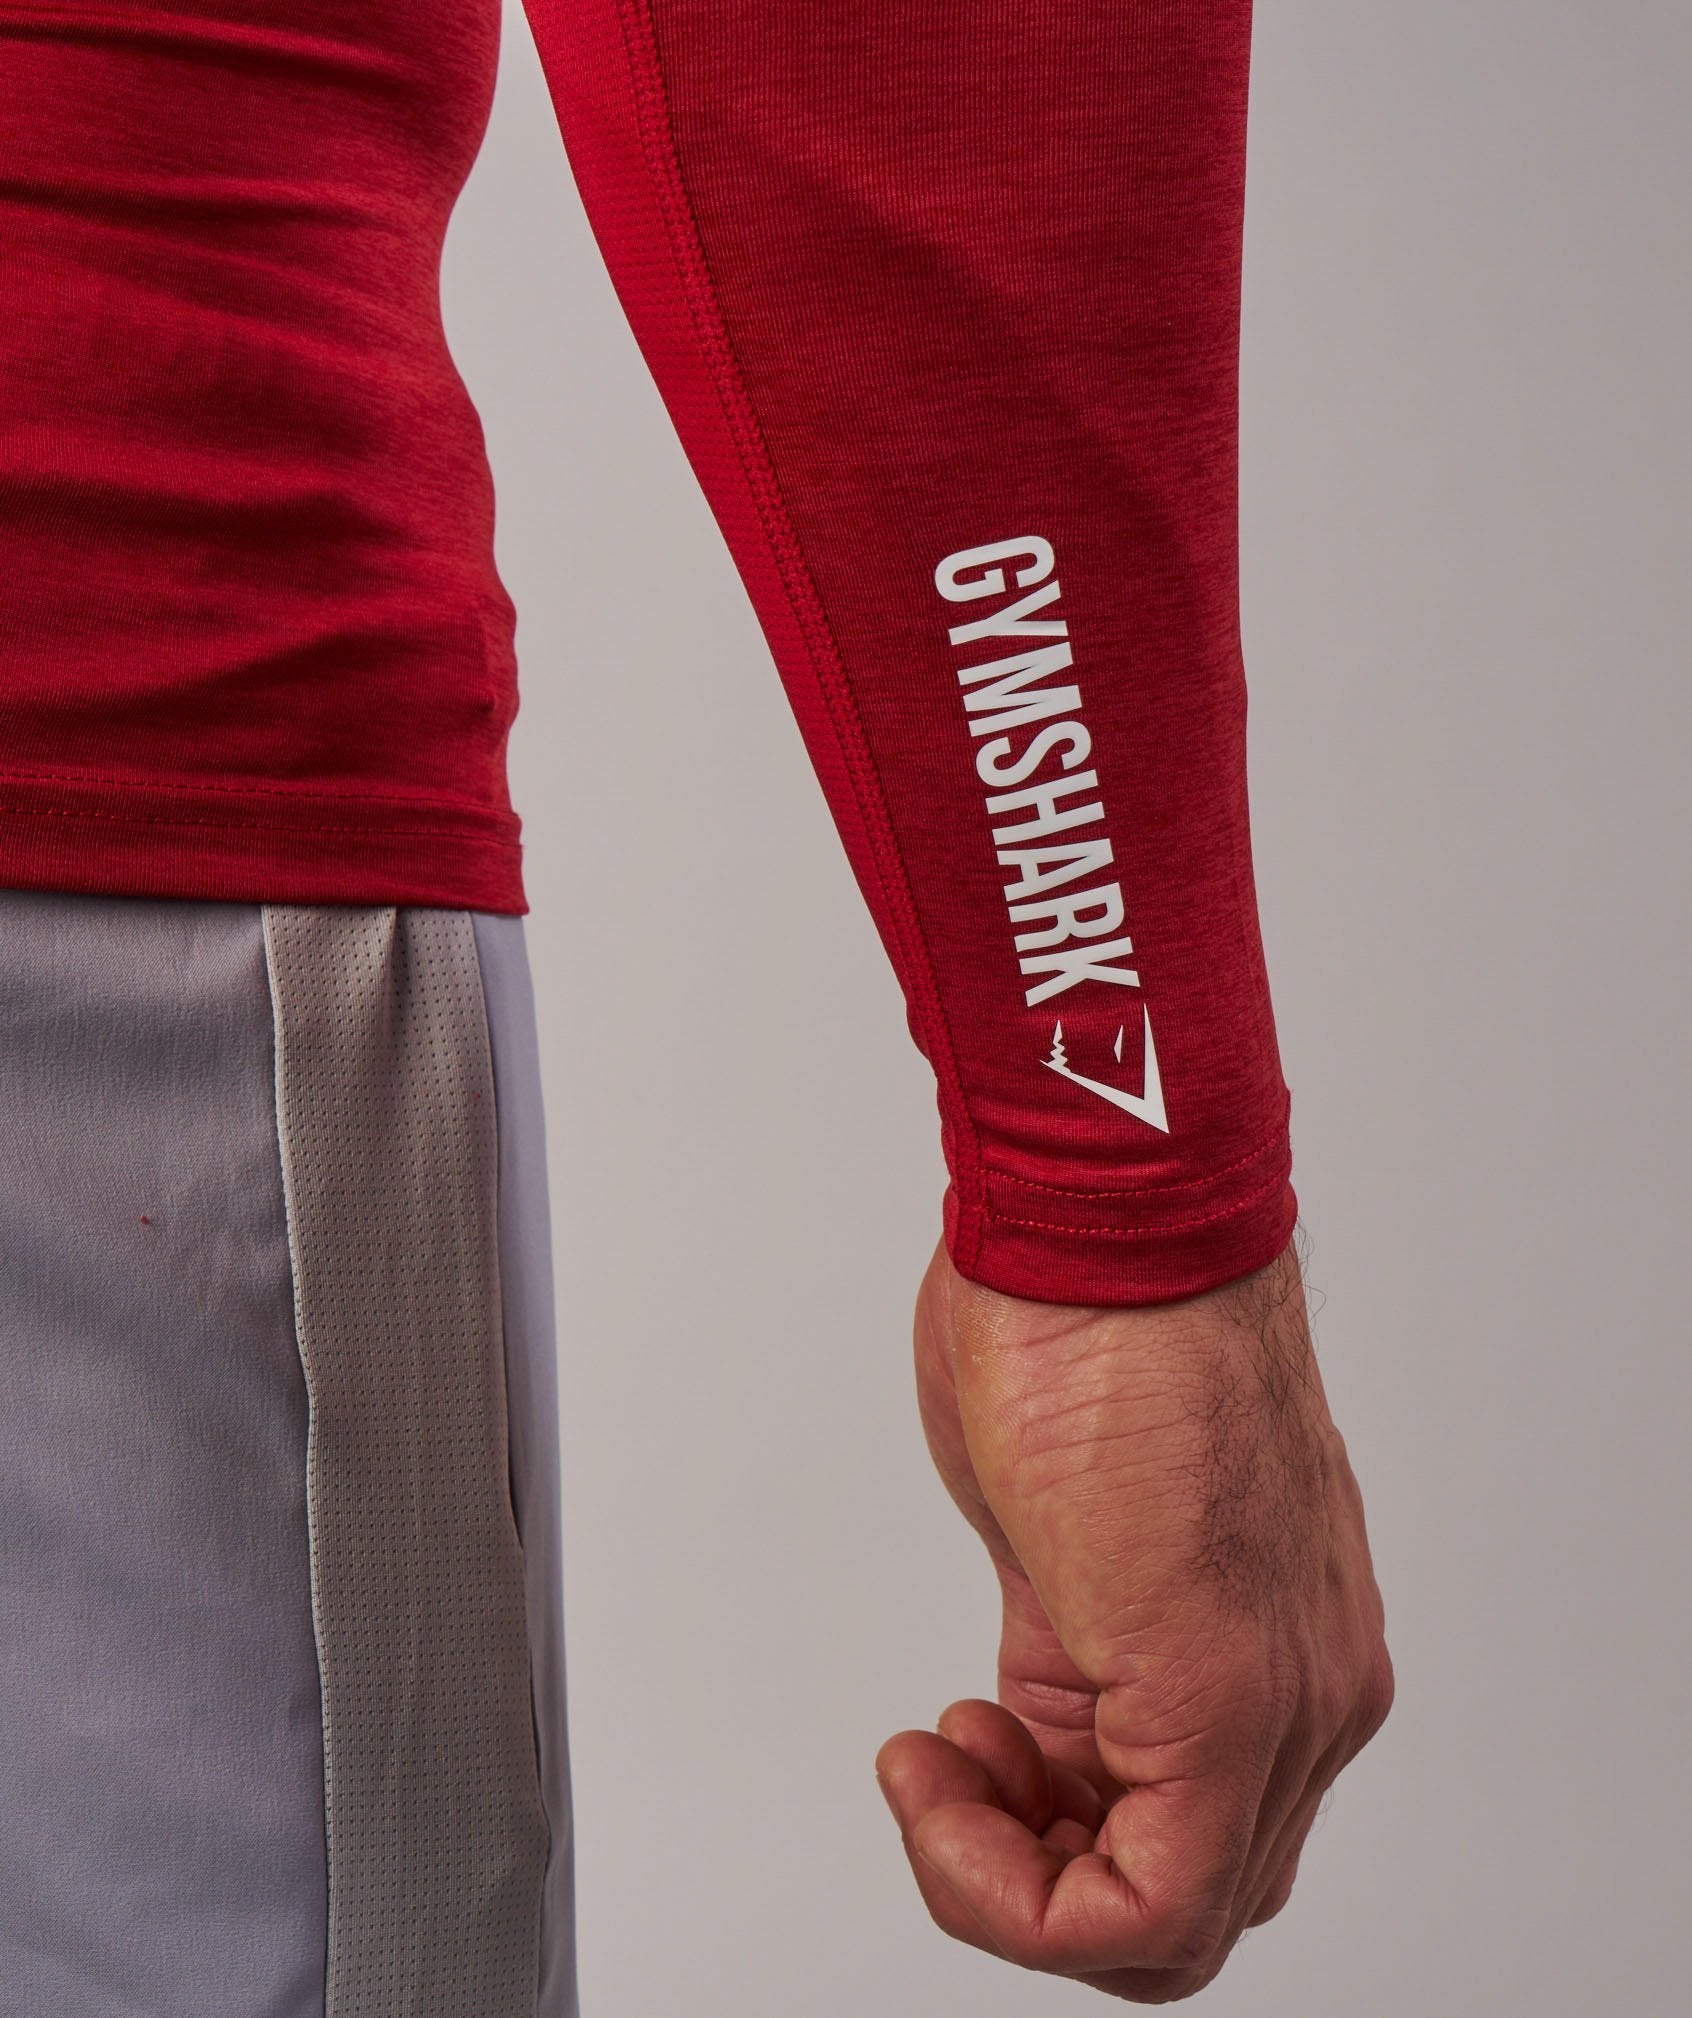 Element Baselayer Long Sleeve Top in Deep Red - view 6